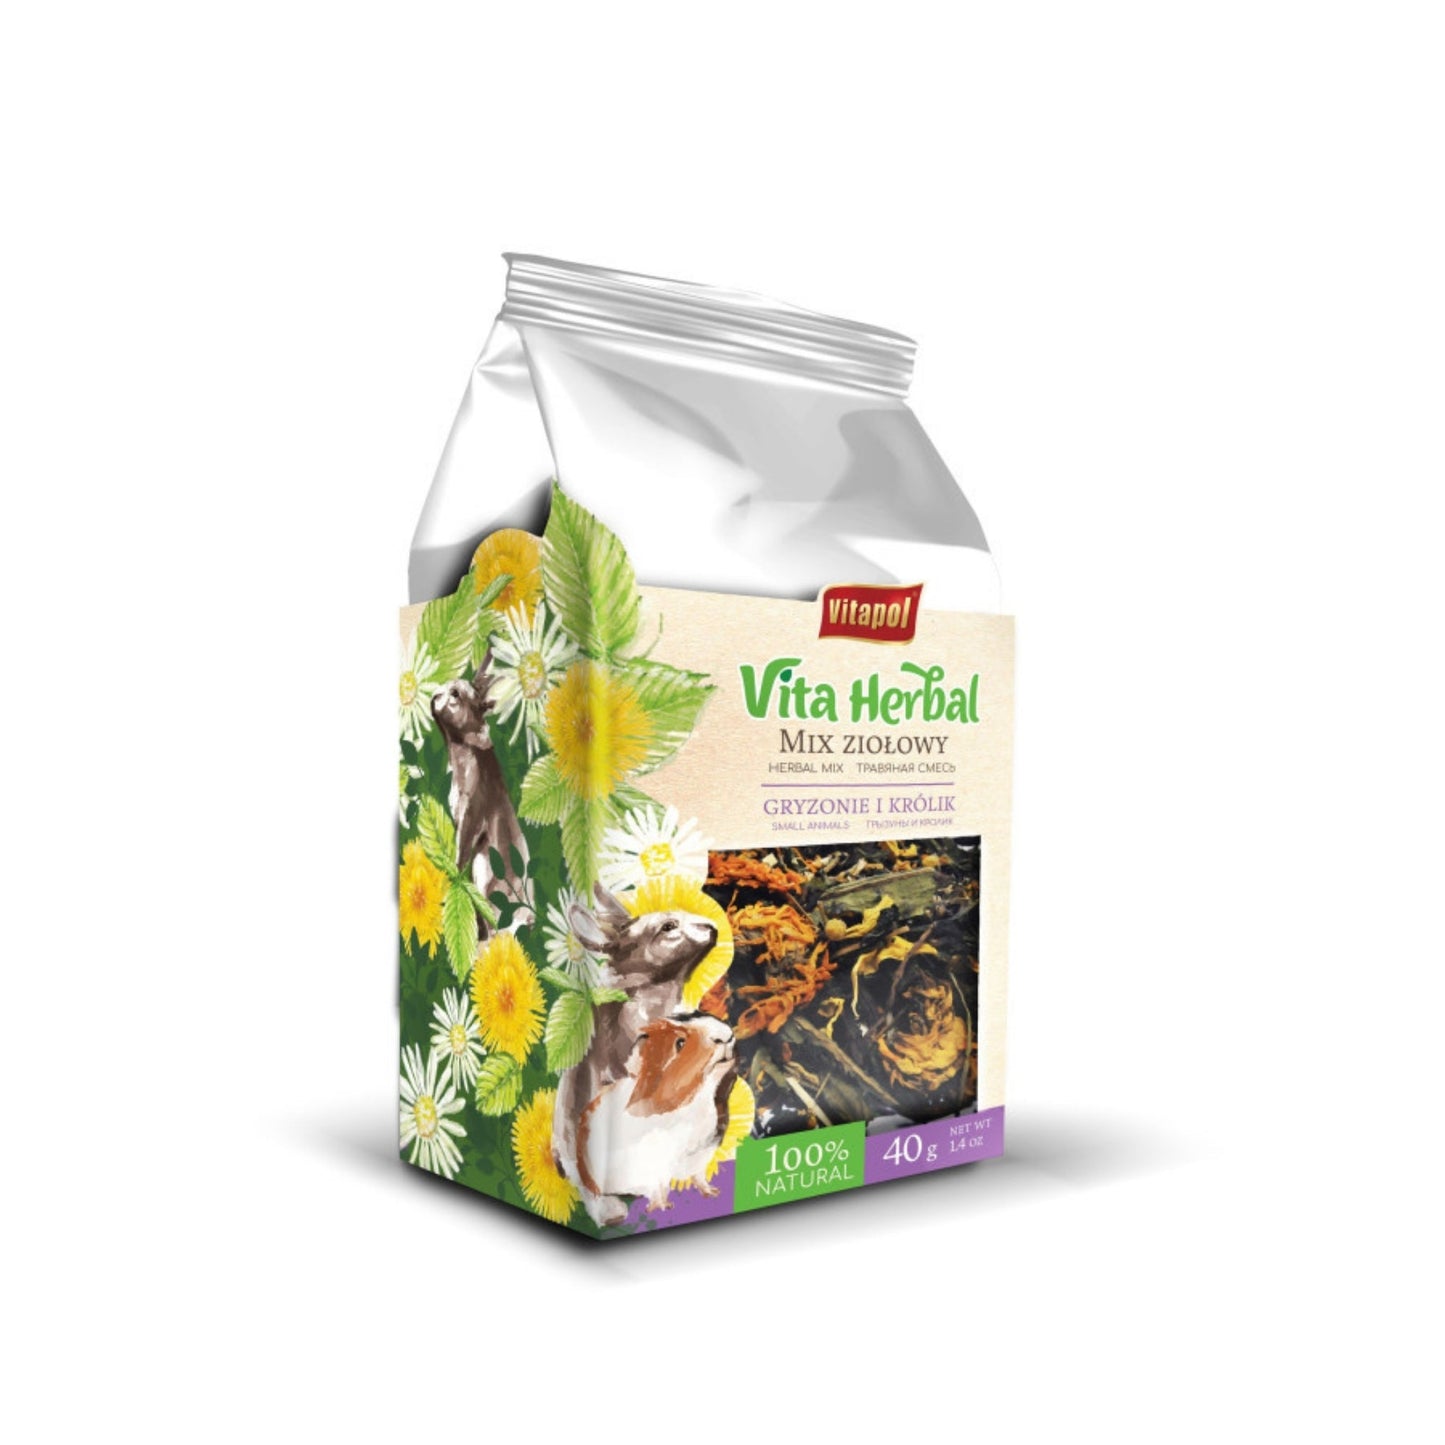 A & E Cages Vitapol Vita Herbal Herbal Mix 1ea/40 g